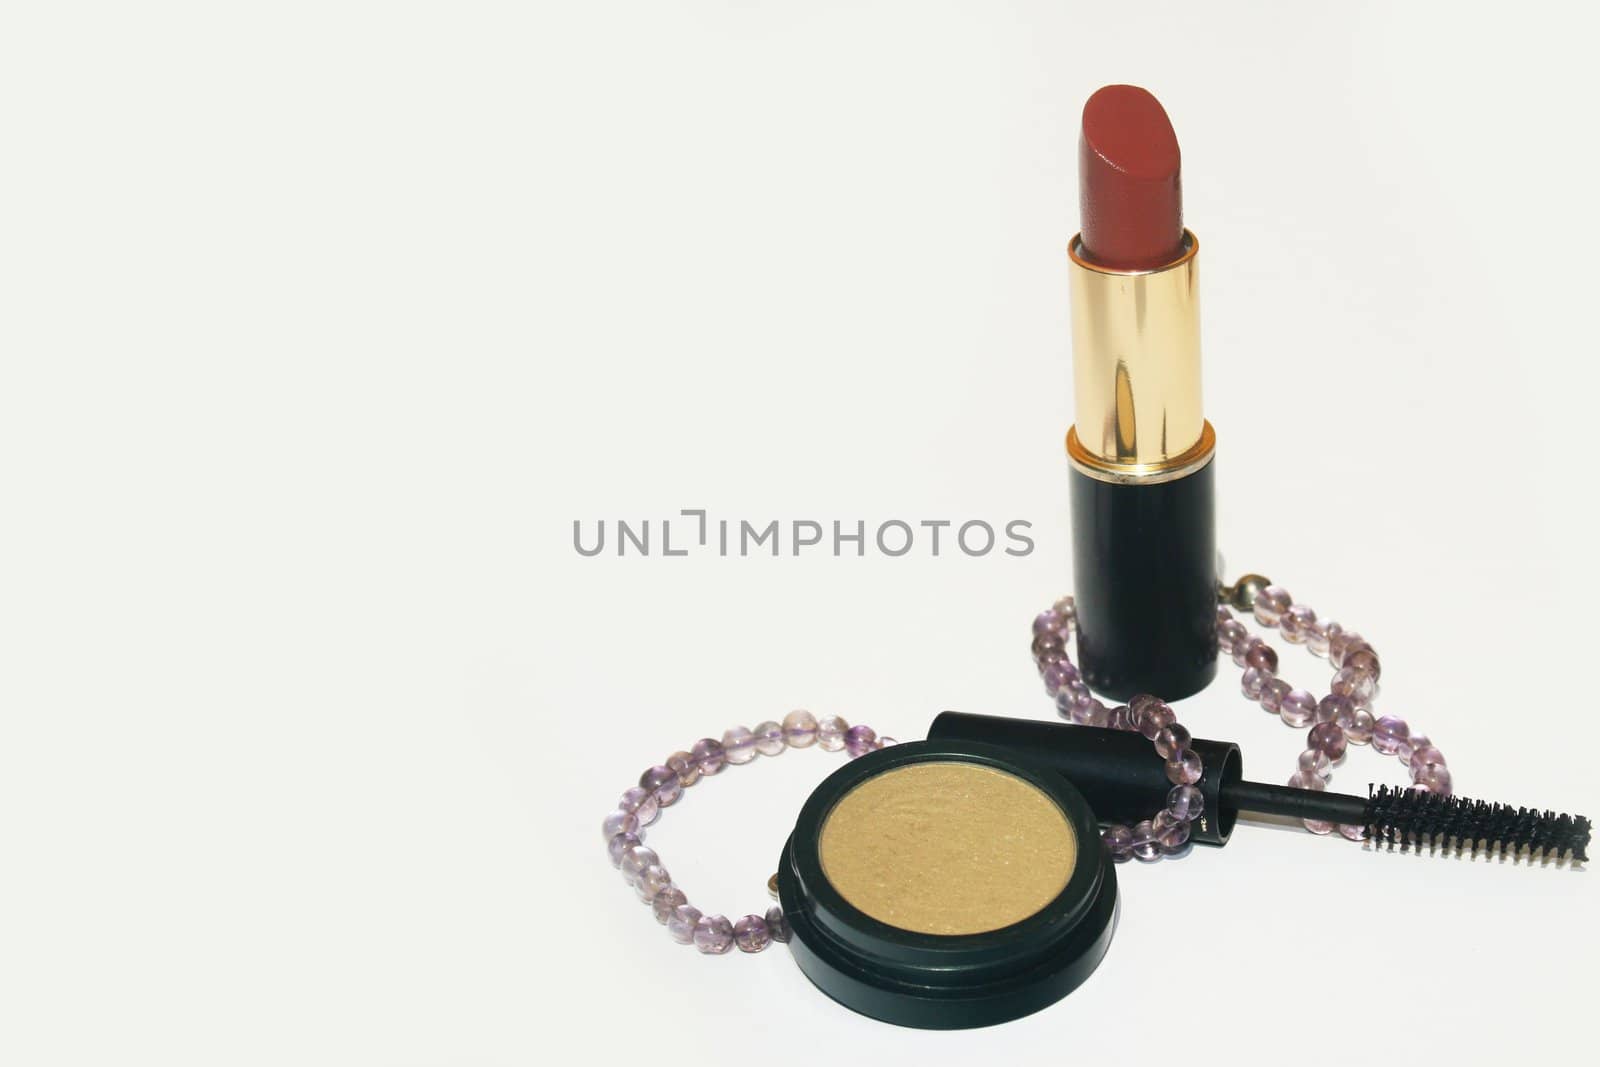 Lipstick, mascara, eyeshadow and a necklace on white background with copy space on left